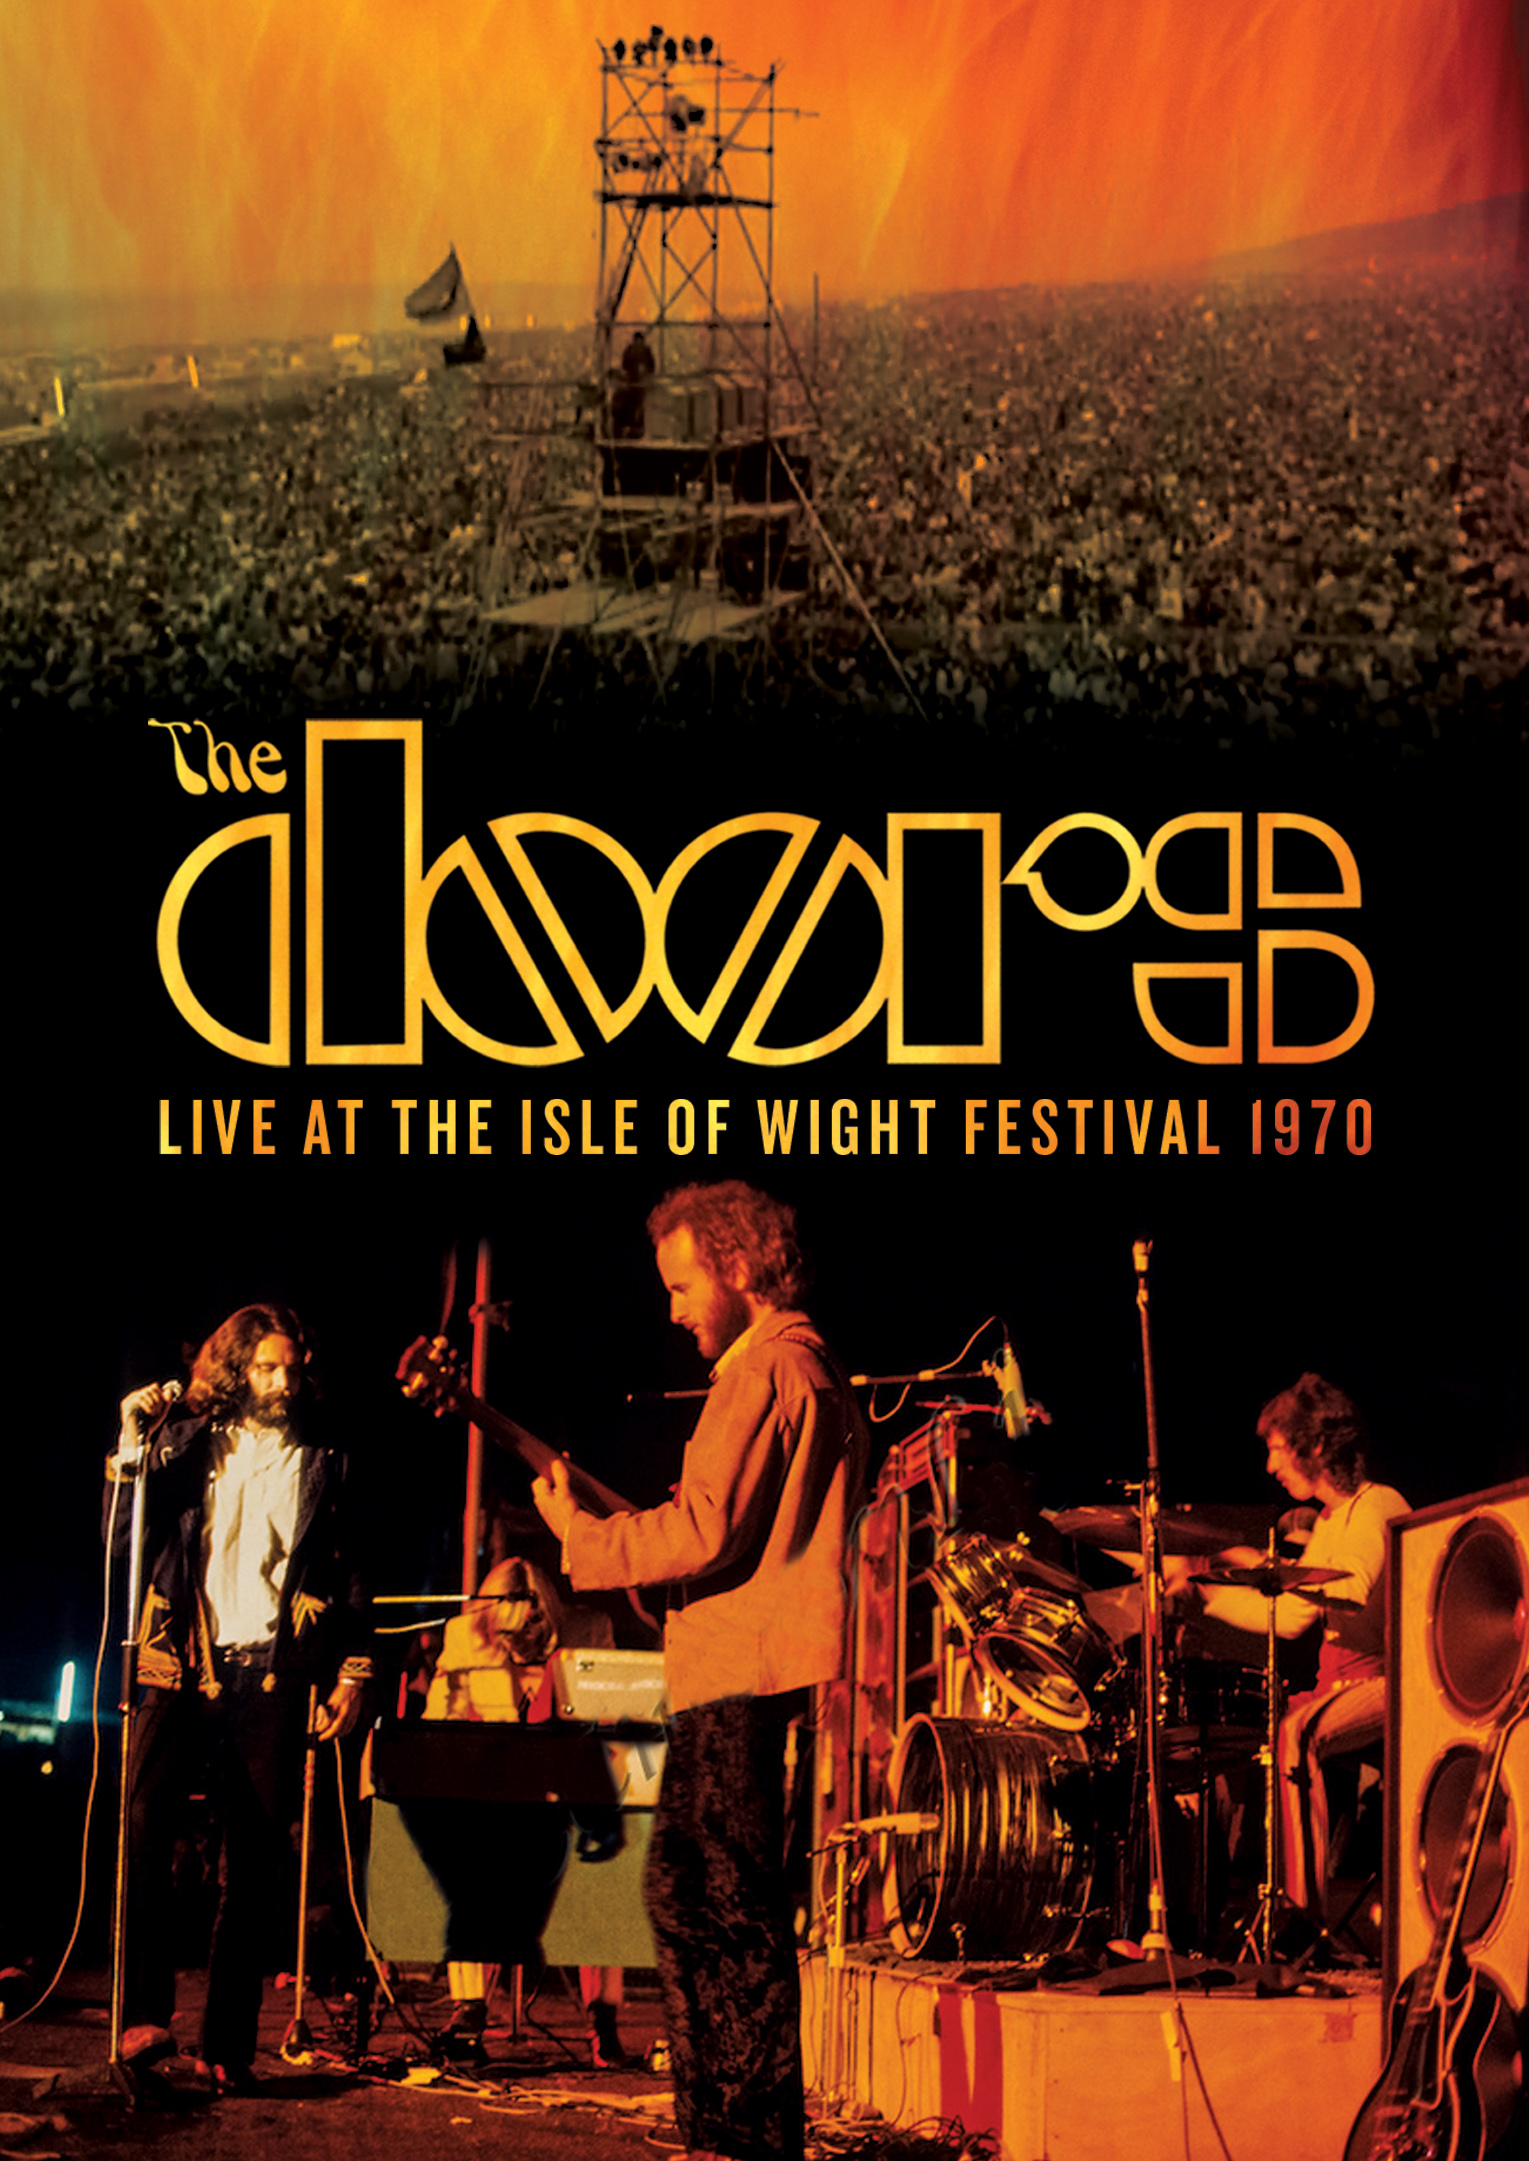 affiche du film The Doors: Live at the Isle of Wight Festival 1970